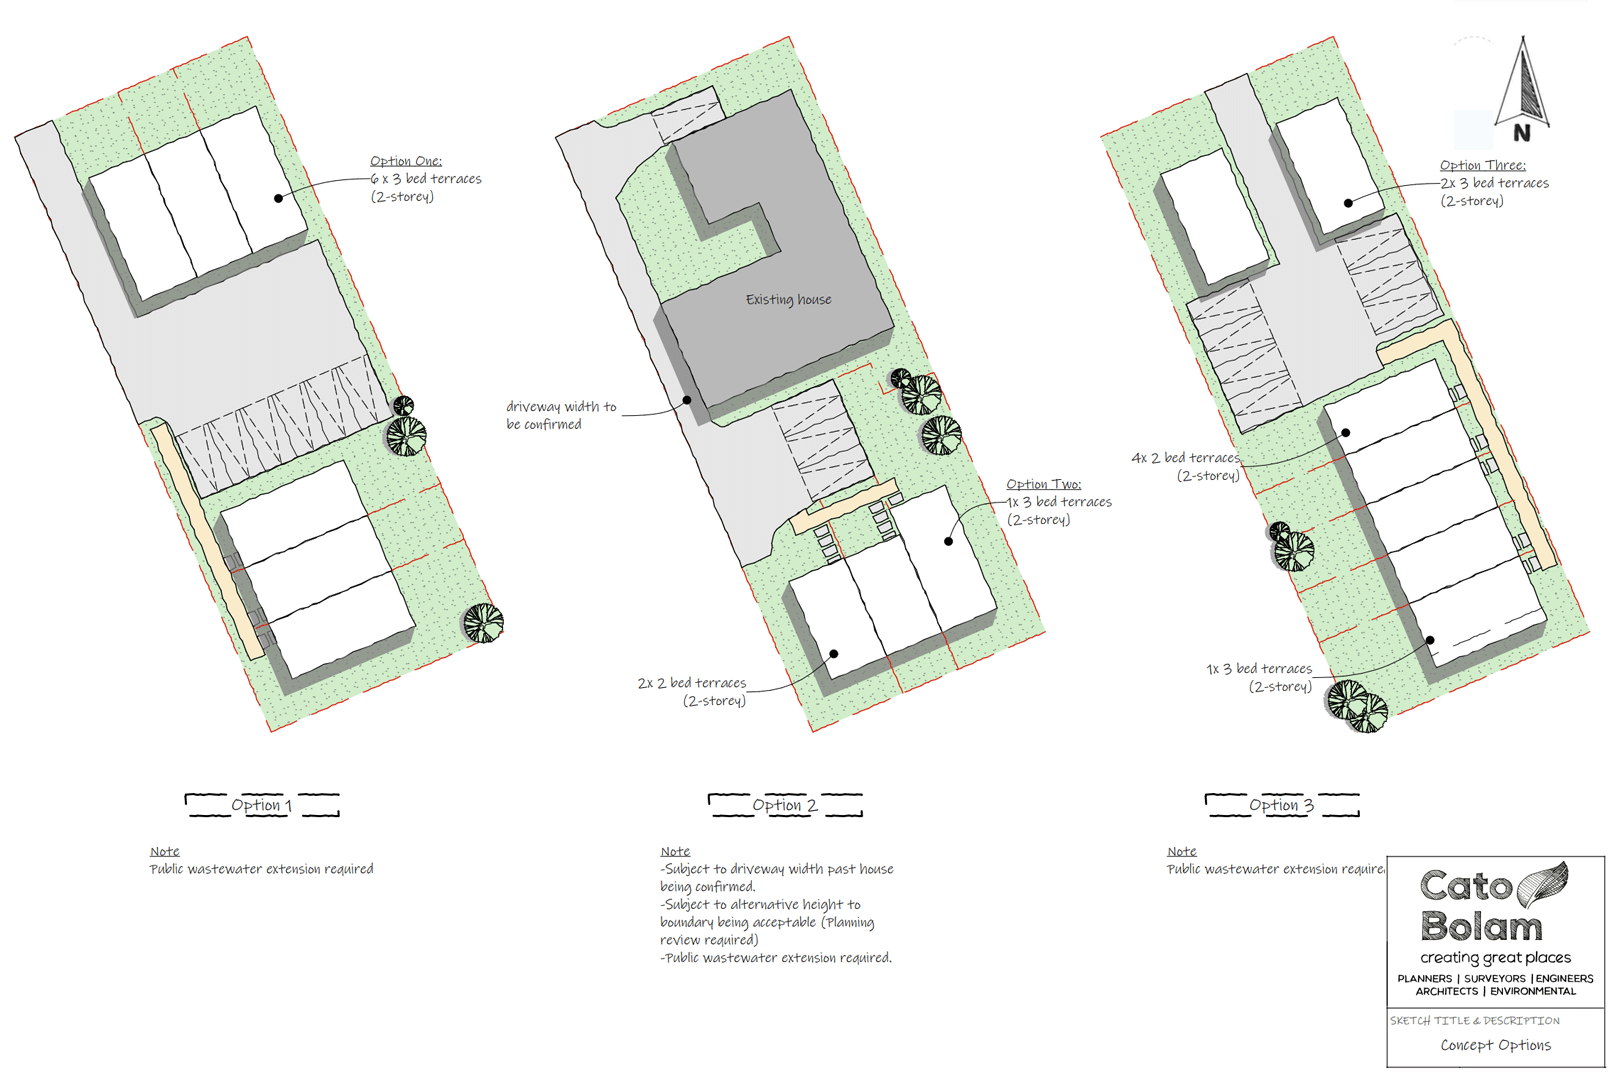 8 Callis Avenue - Property Development - The Importance of Initial Development Feasibility and Concept Option Analysis